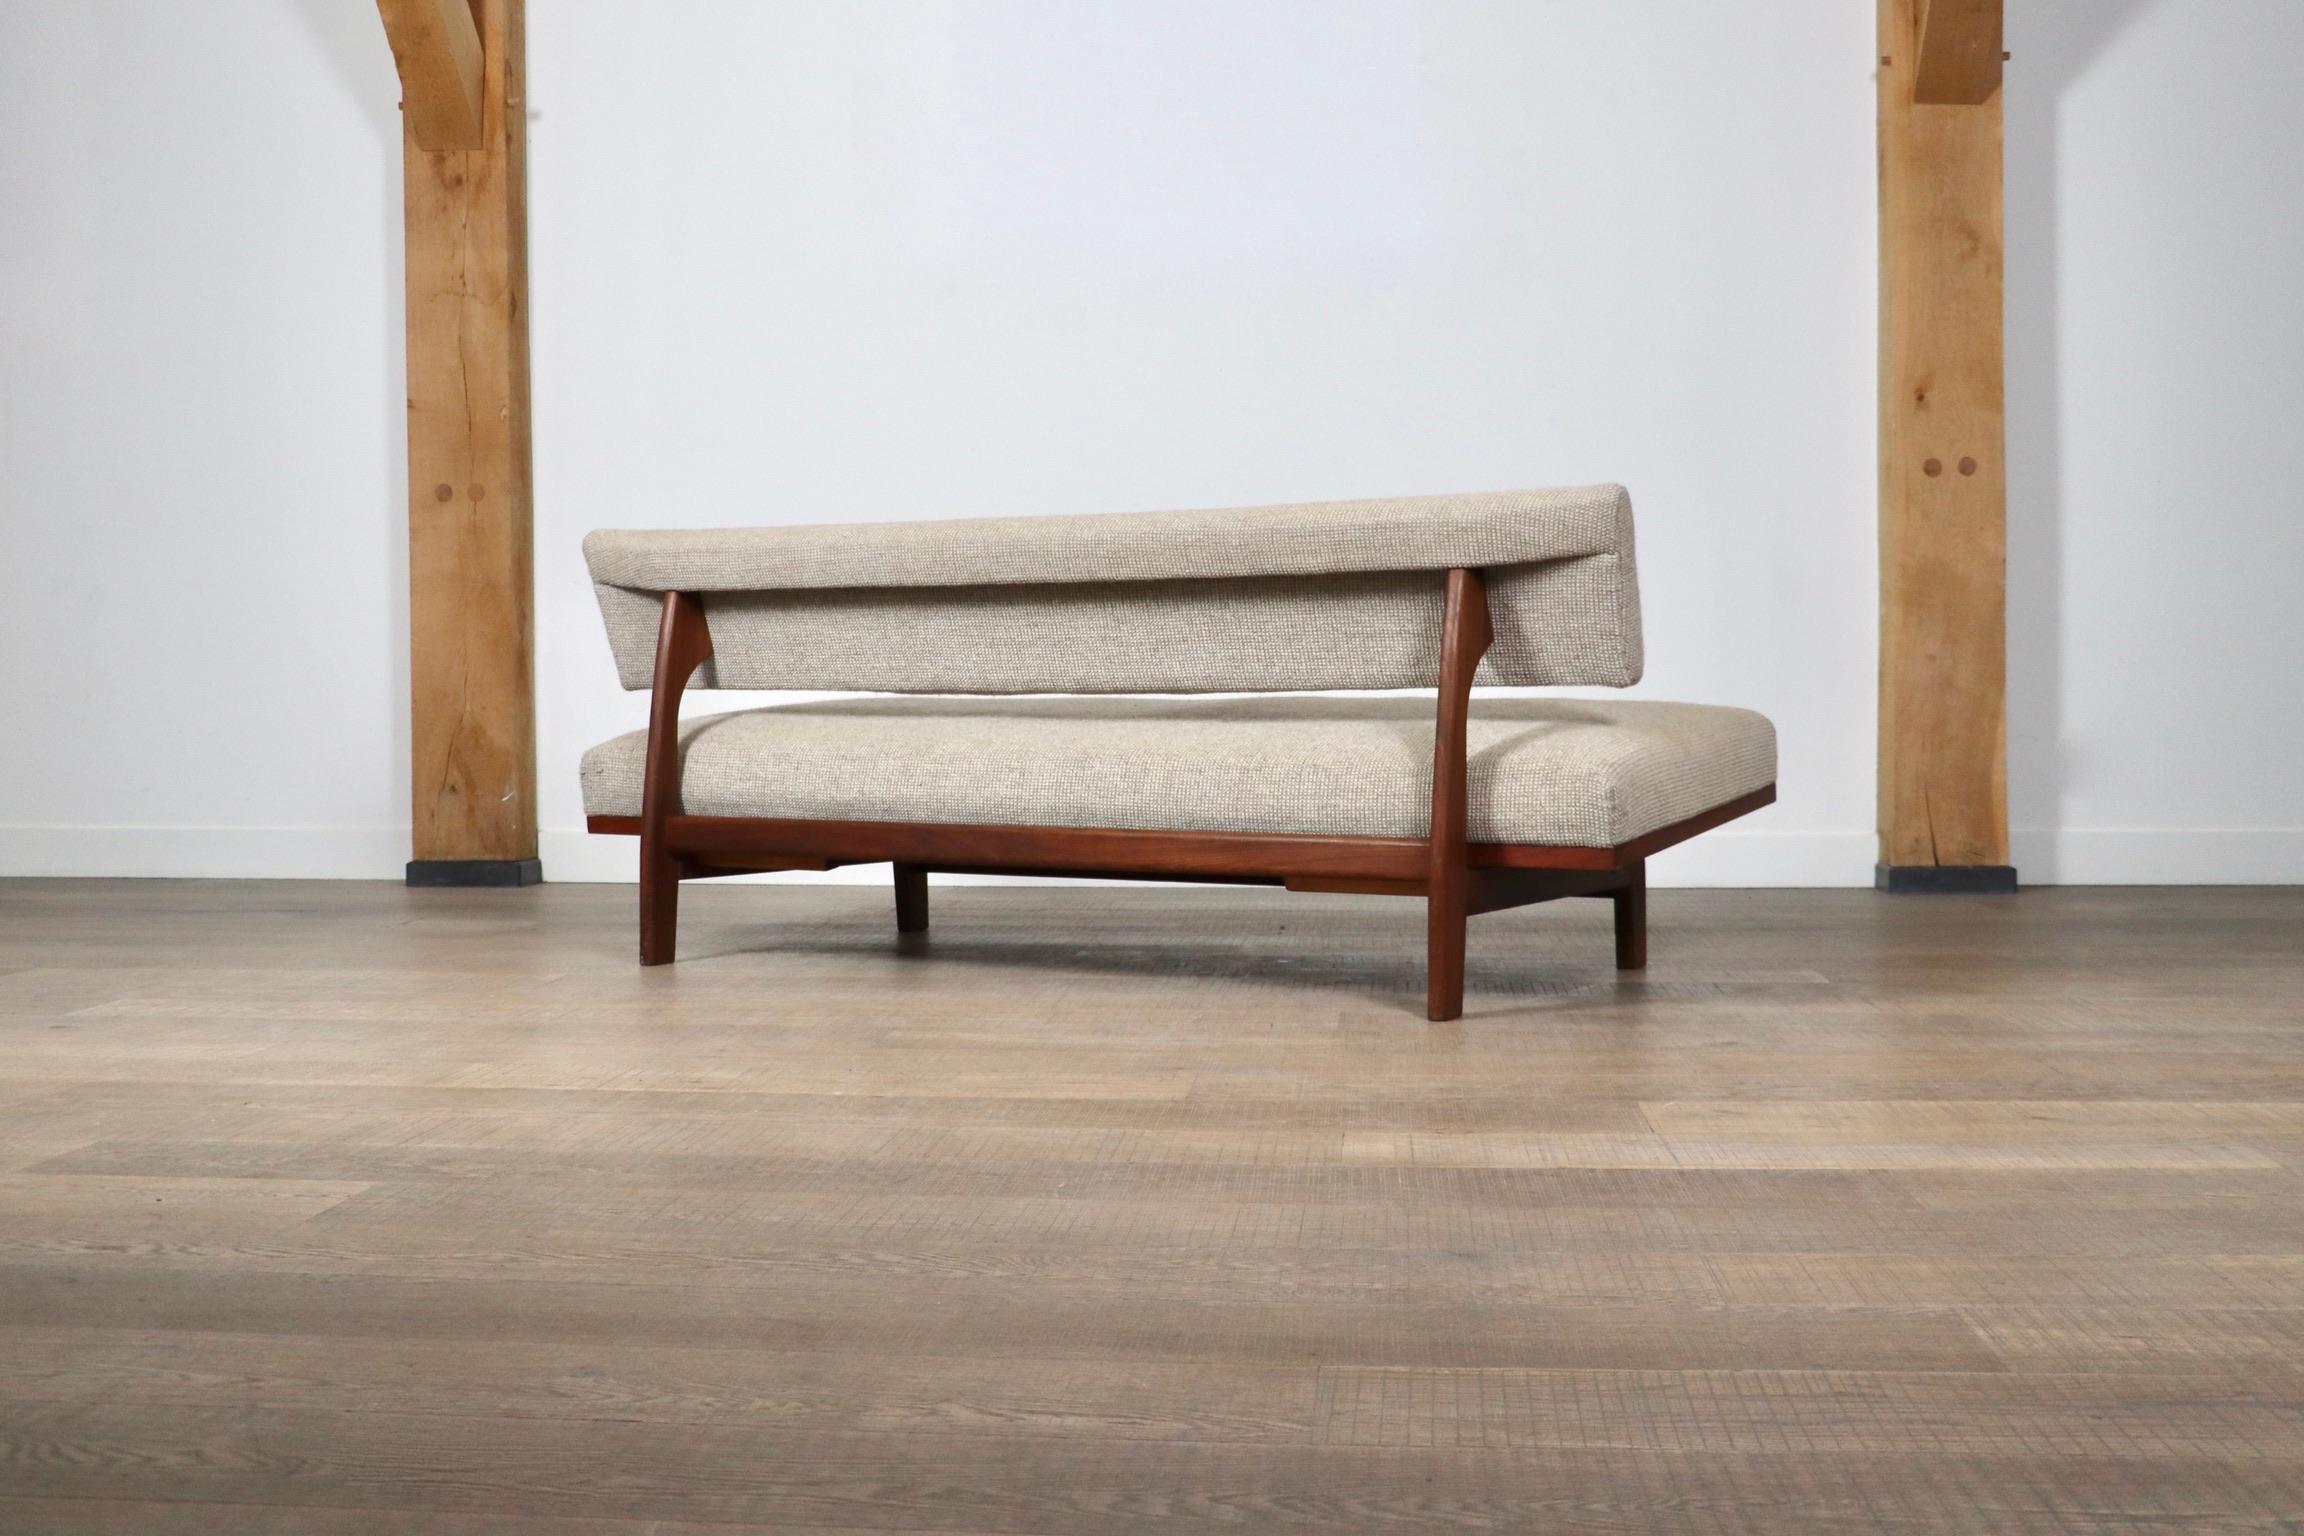 Mid-20th Century Midcentury Three Seater Sofa Bed Model 470 By Hans Bellman For Wilkhahn, 1964